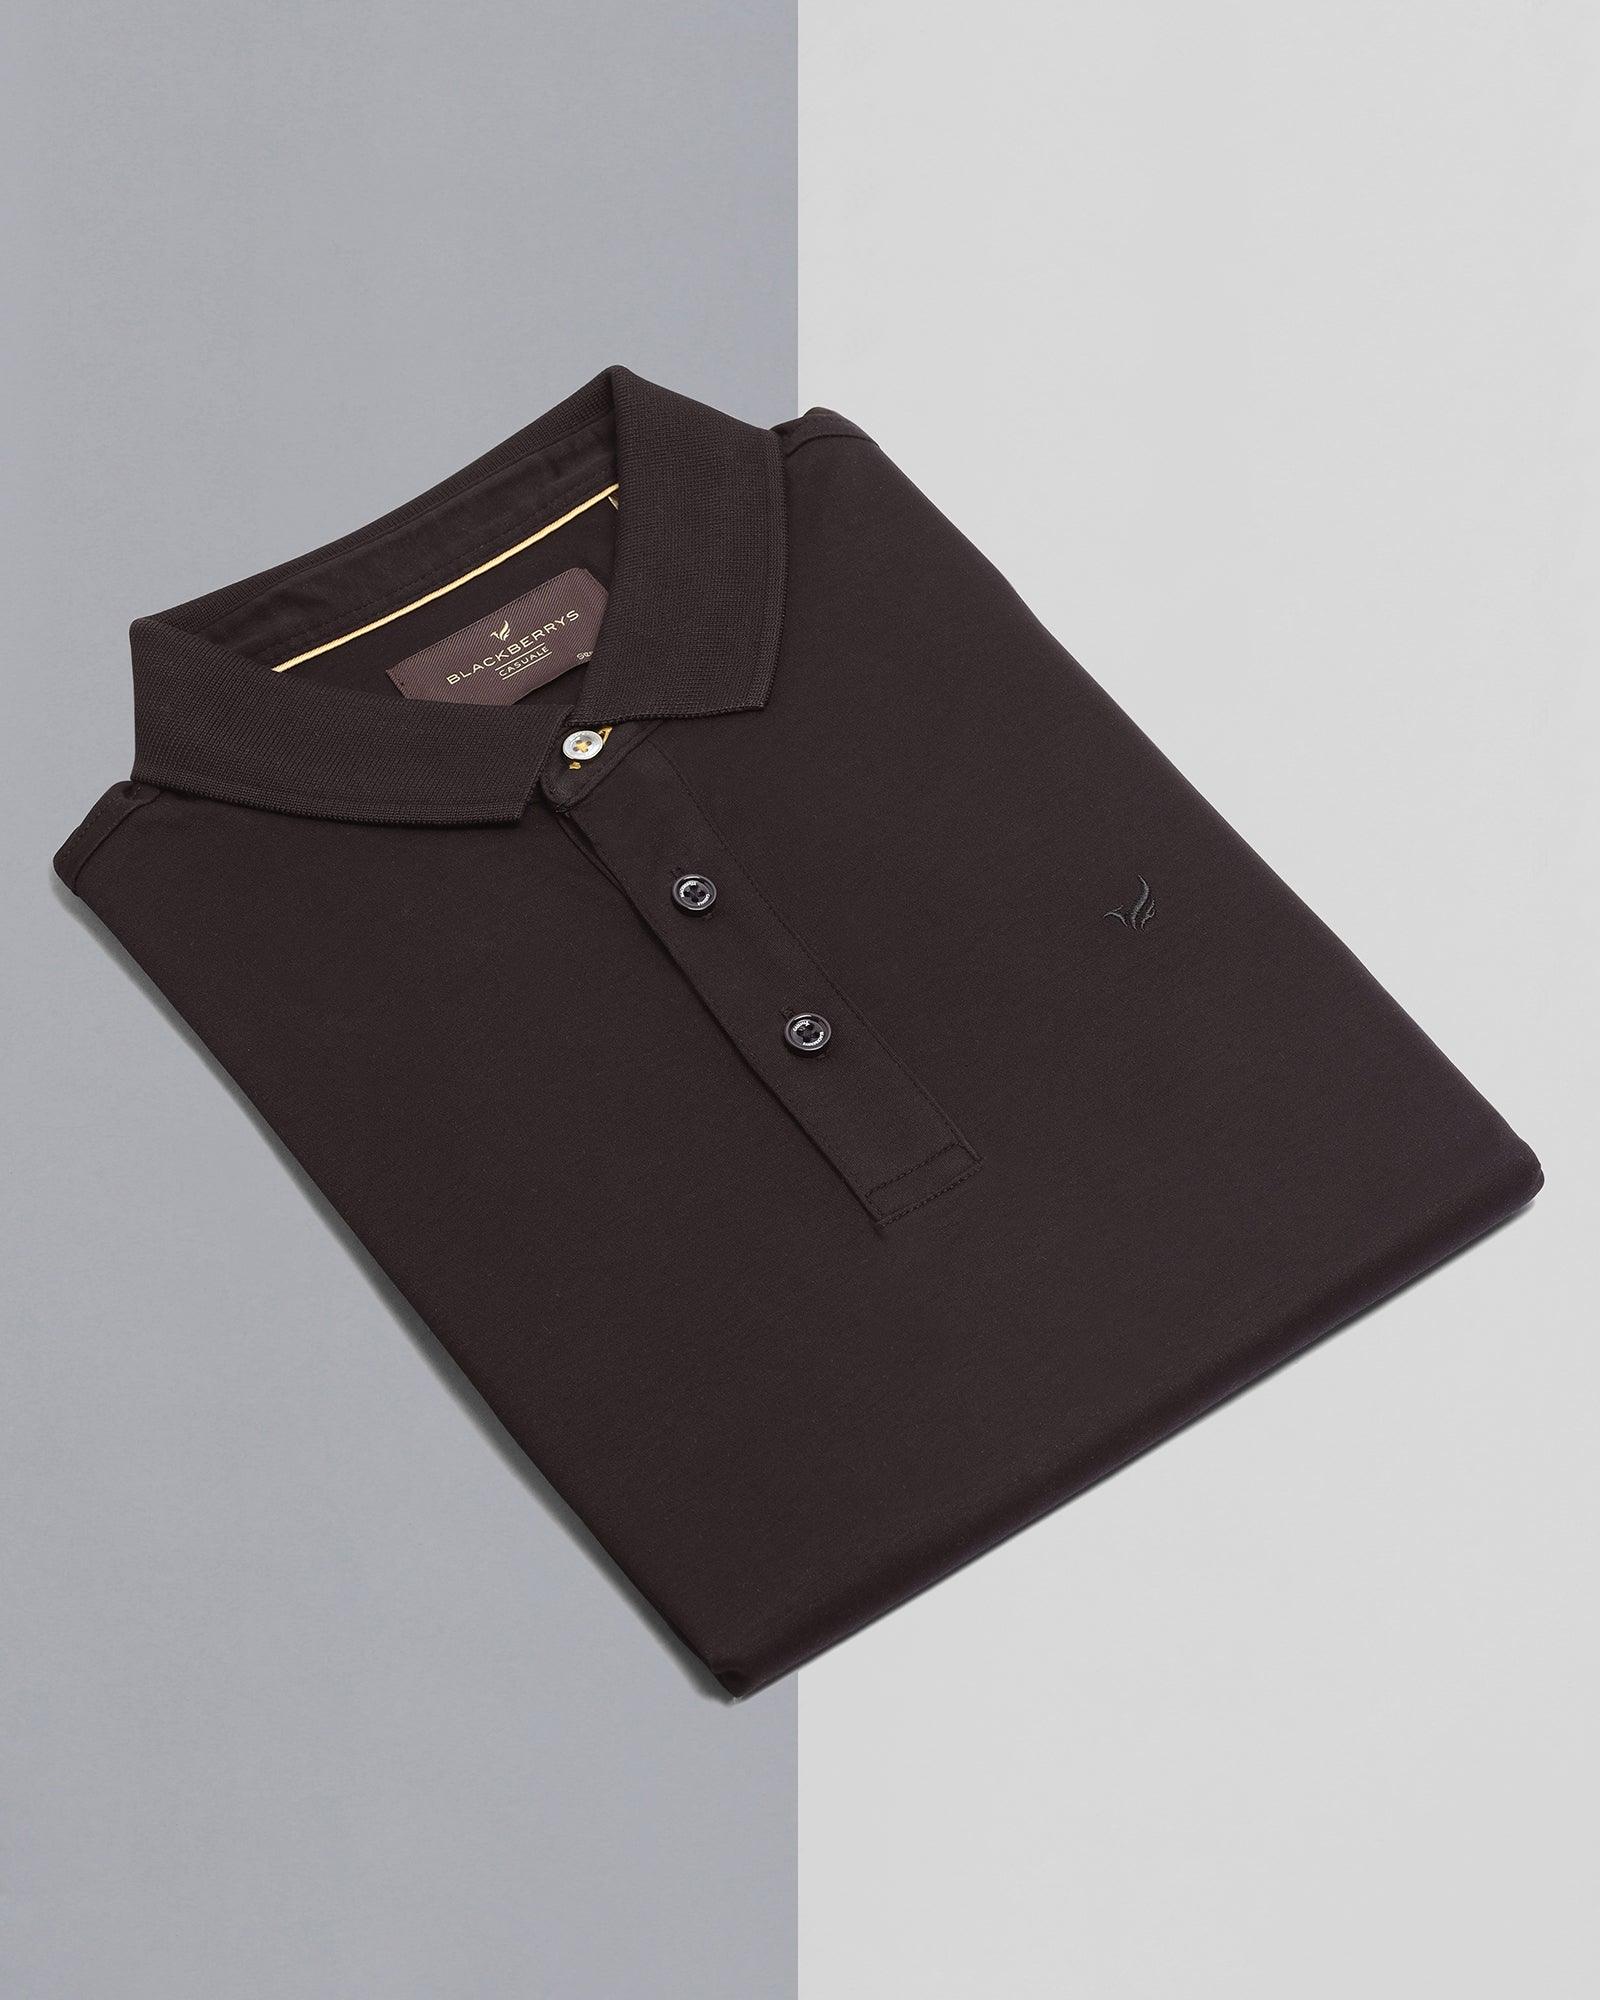 Polo Black Solid T Shirt - Toll